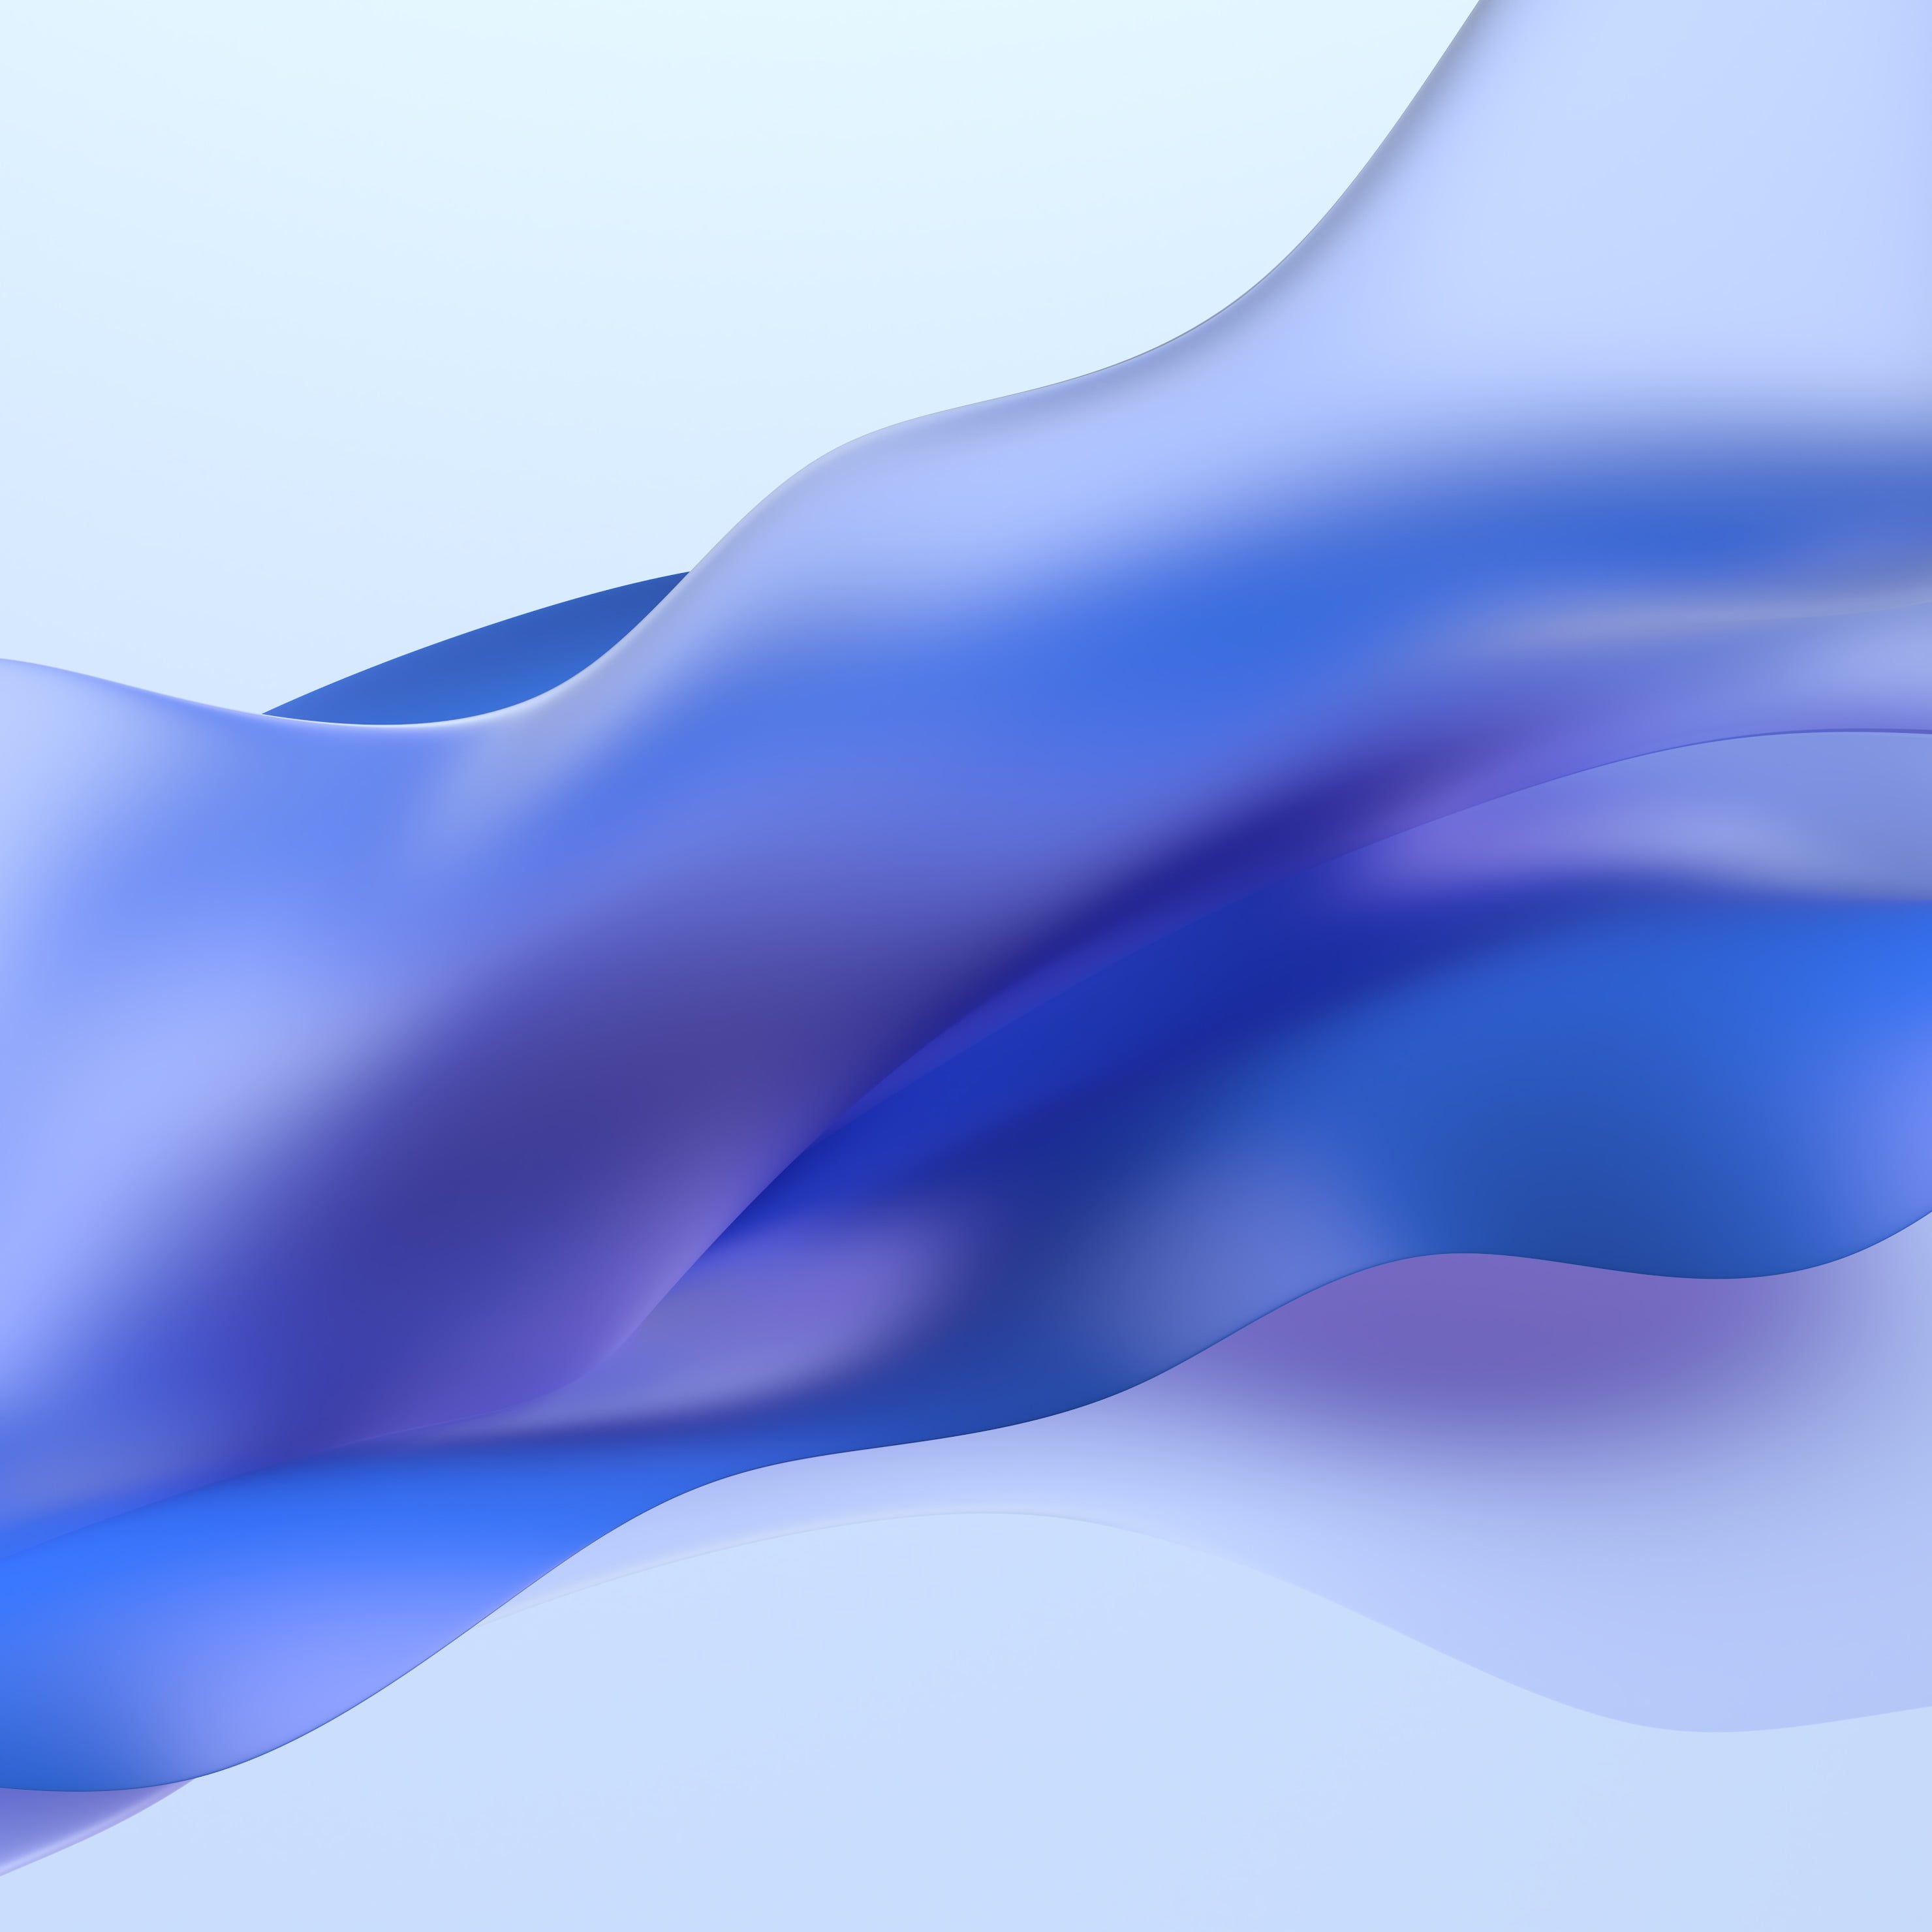 chrome, Chrome OS, abstract, 3D Abstract, gradient, soft gradient